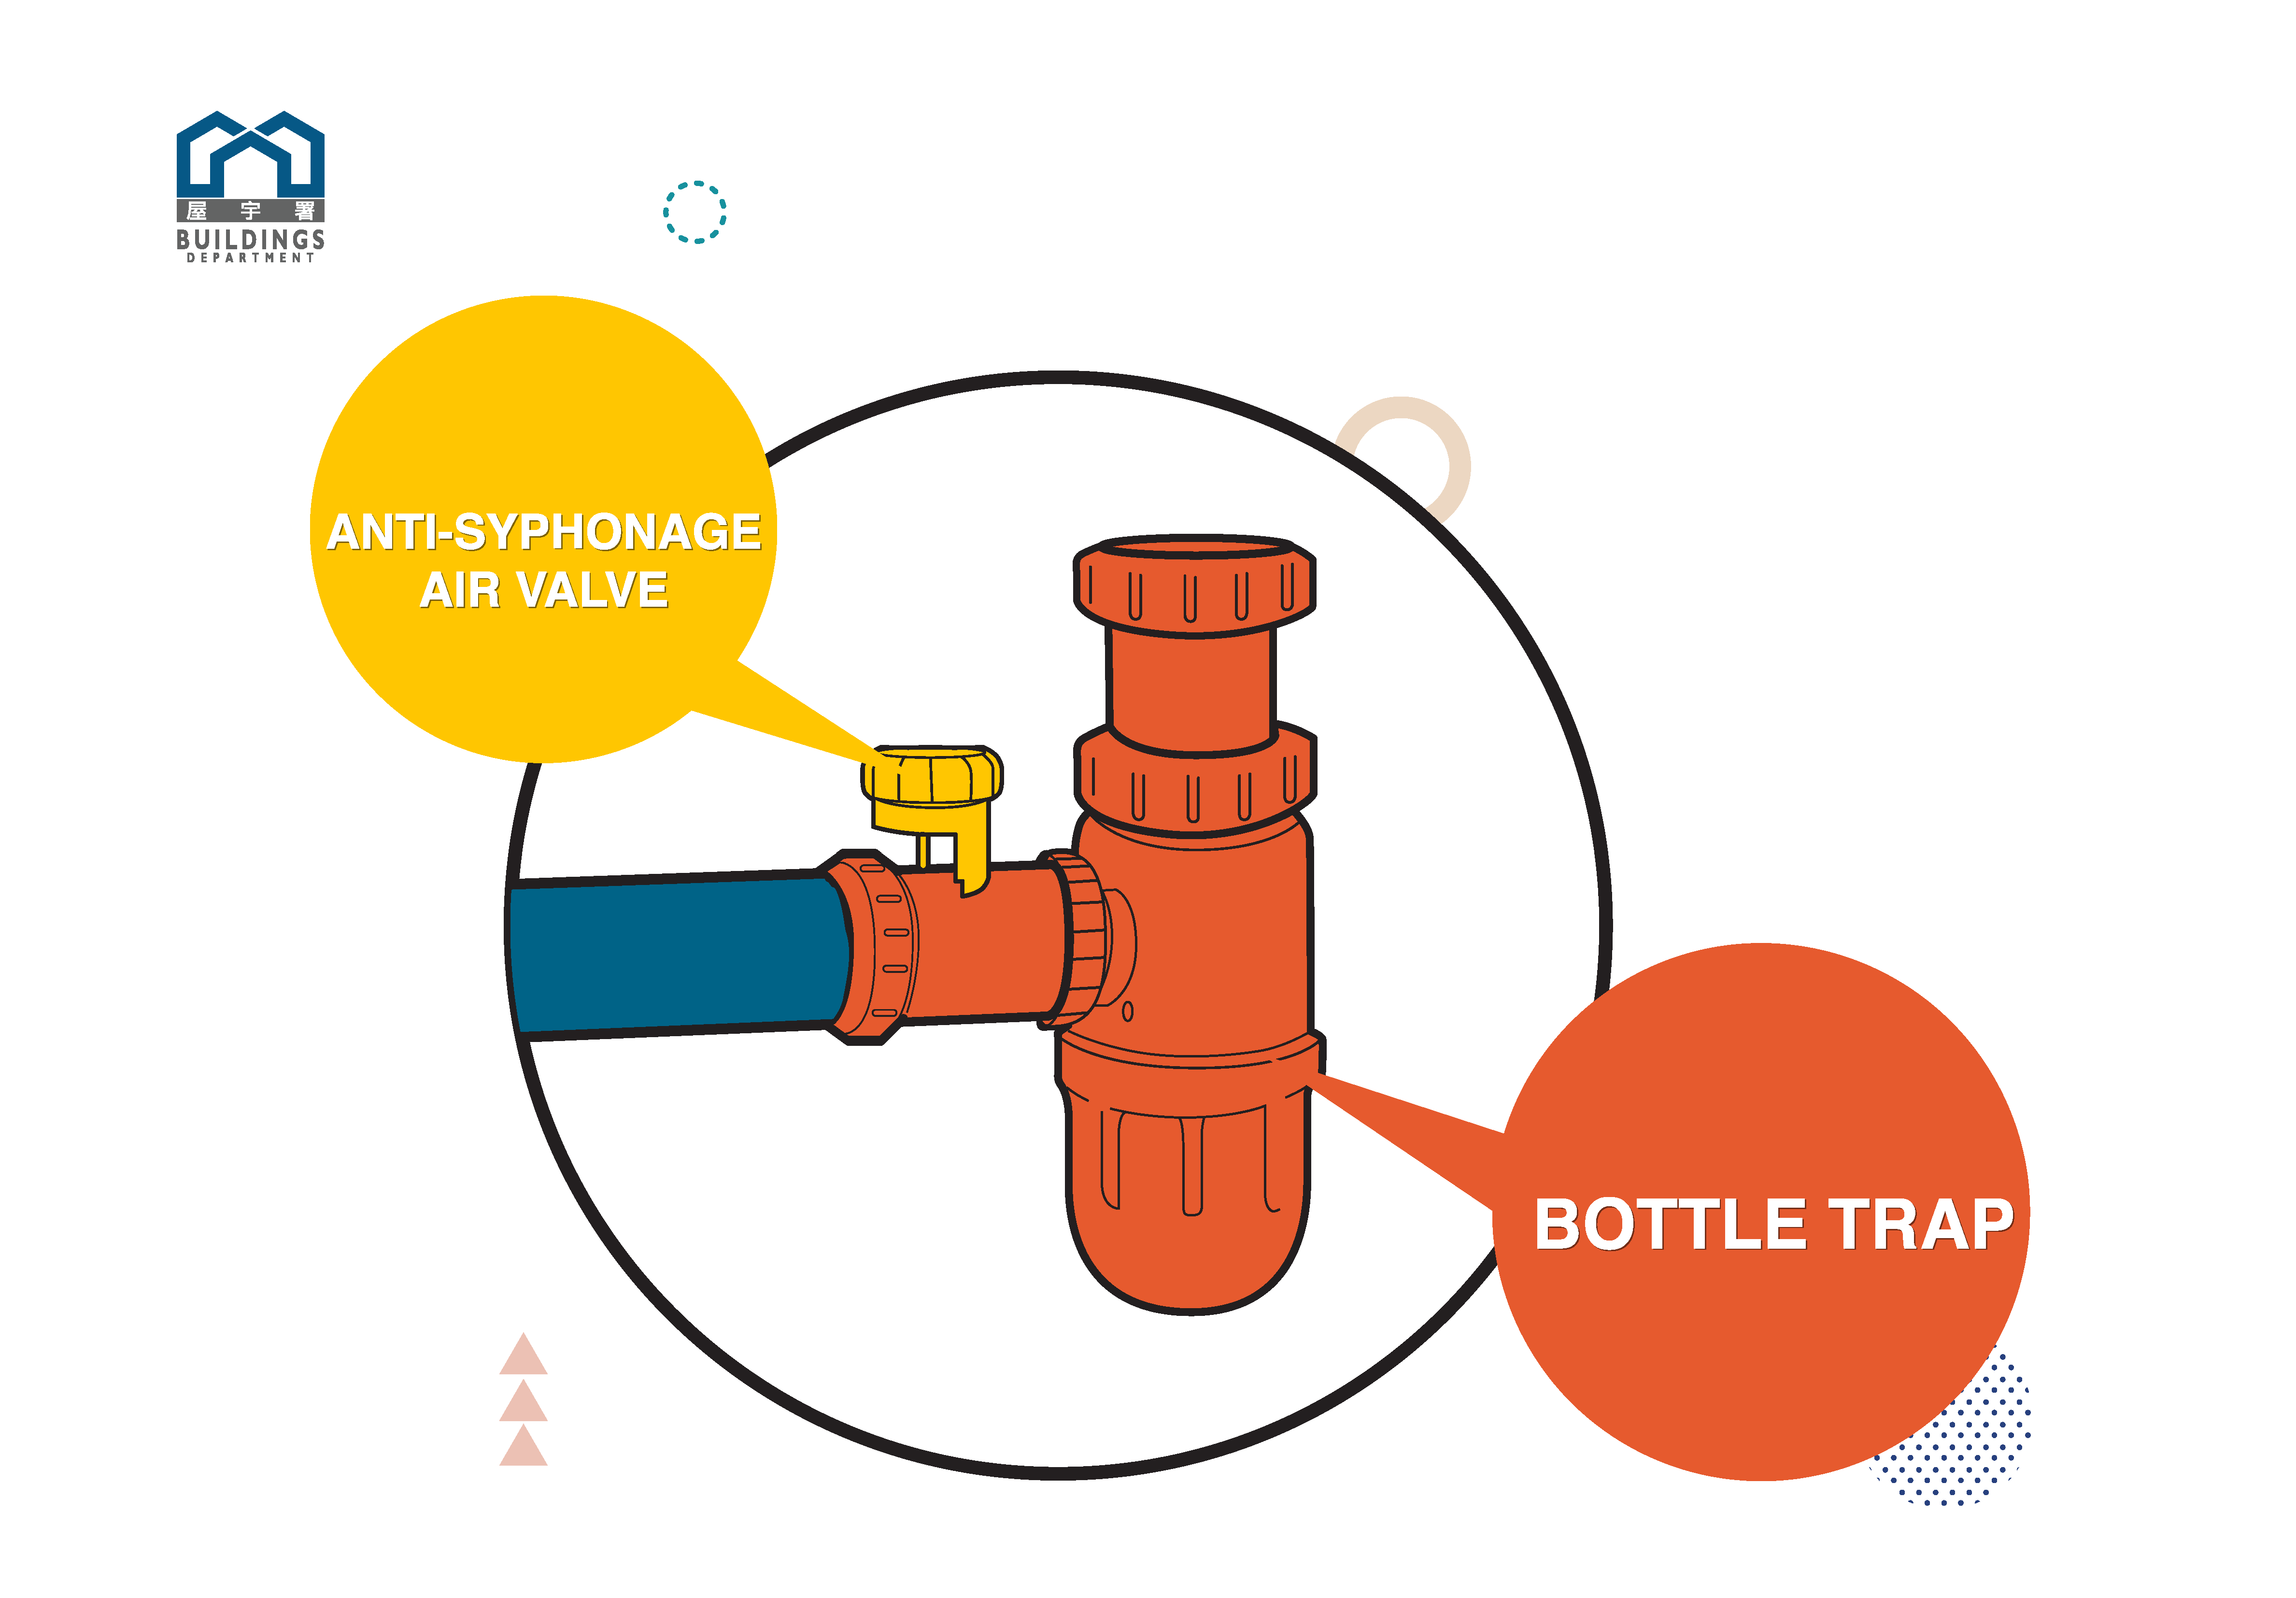 Bottle trap with anti-syphonage air valve